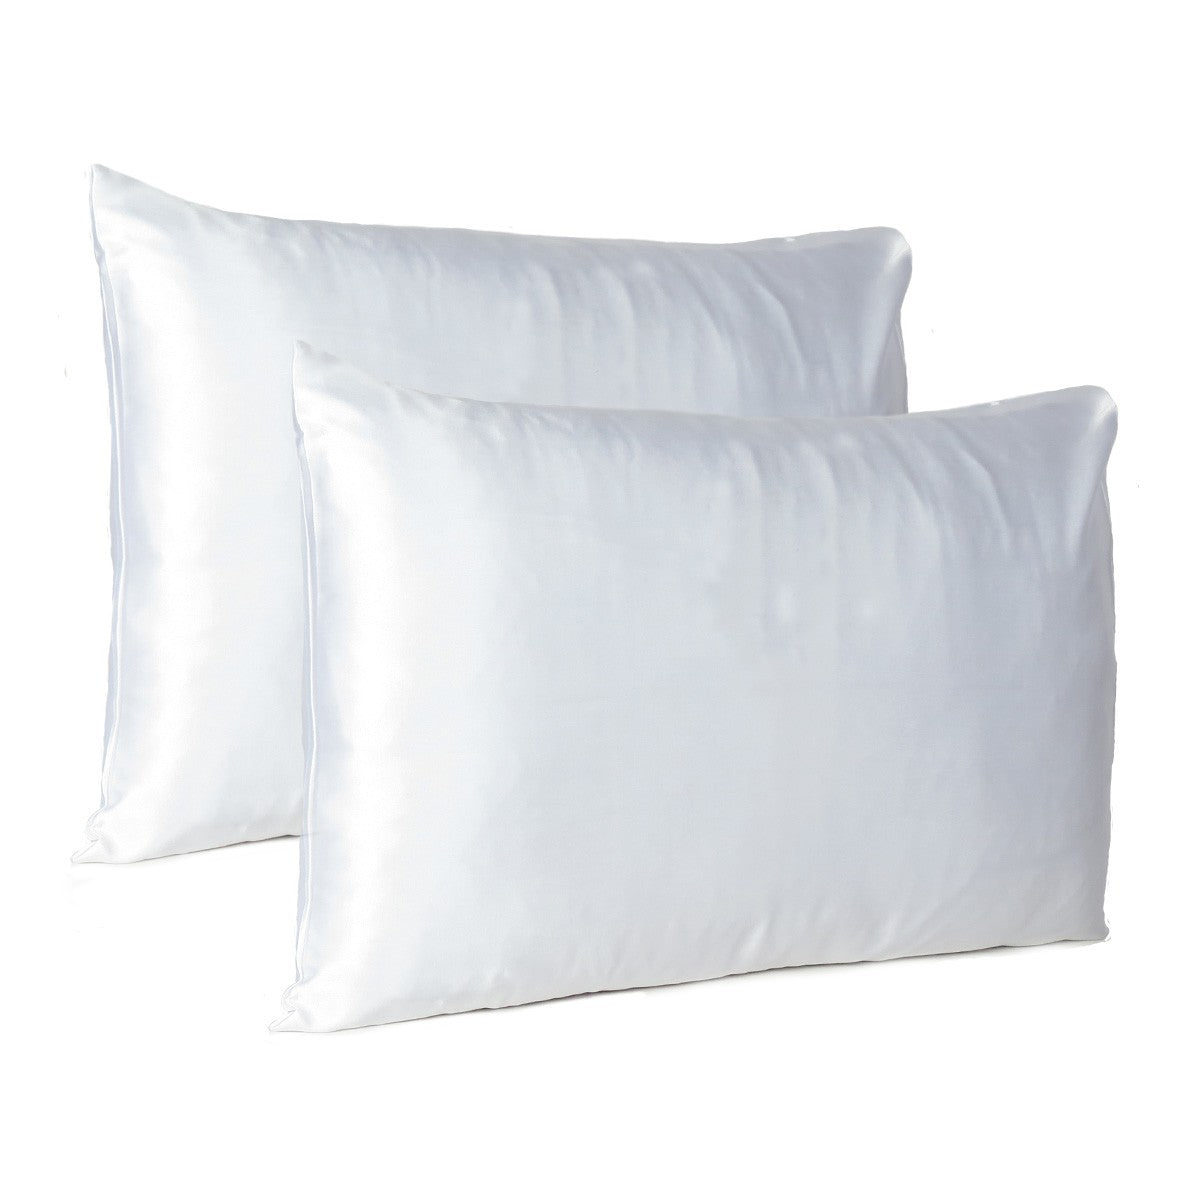 White-Dreamy-Set-Of-2-Silky-Satin-Standard-Pillowcases-Bed-Sheets